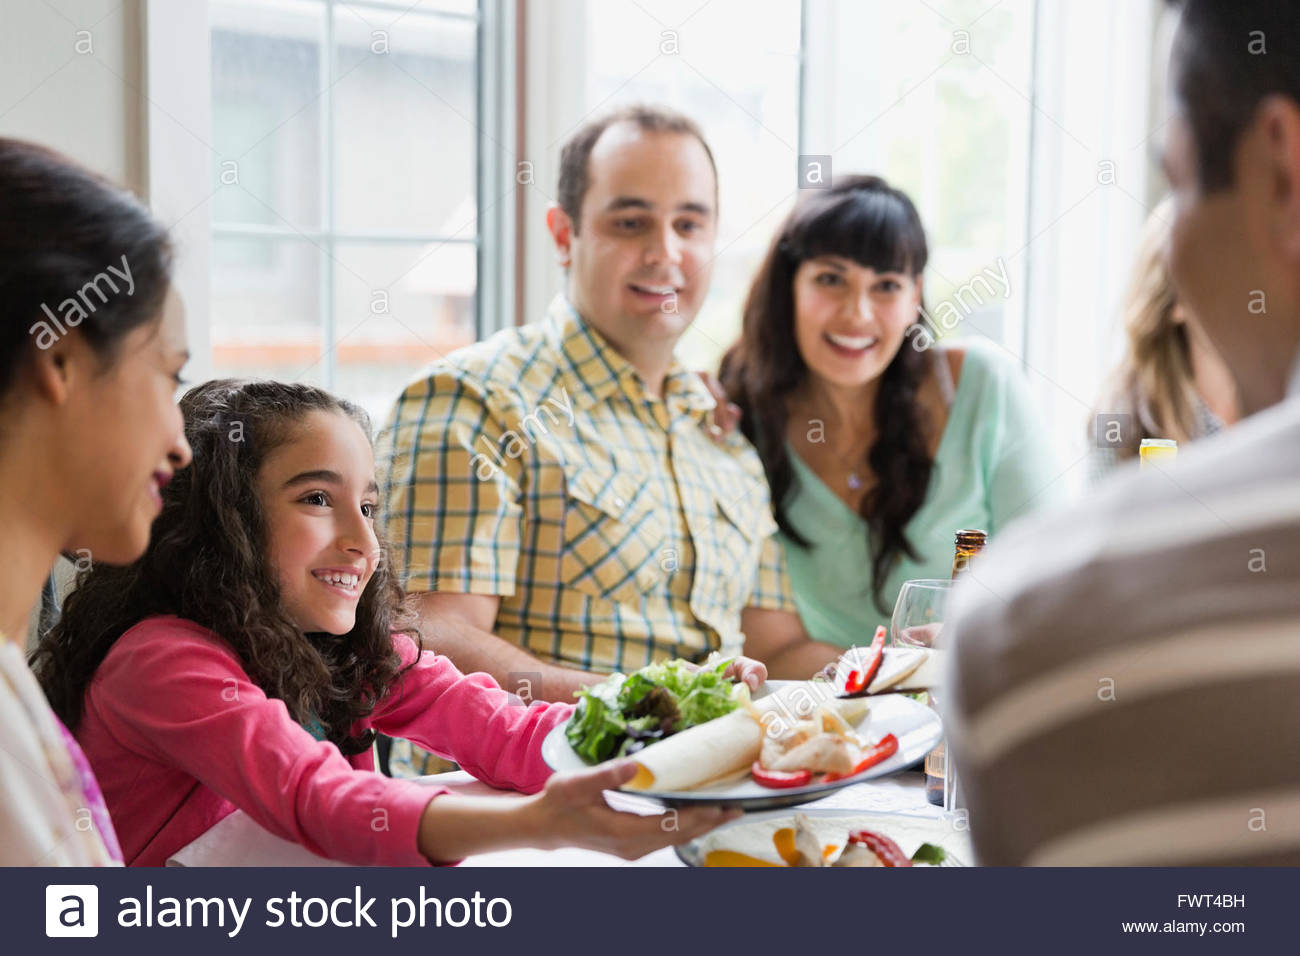 Little girl passing plate to man at dining table Stock Photo